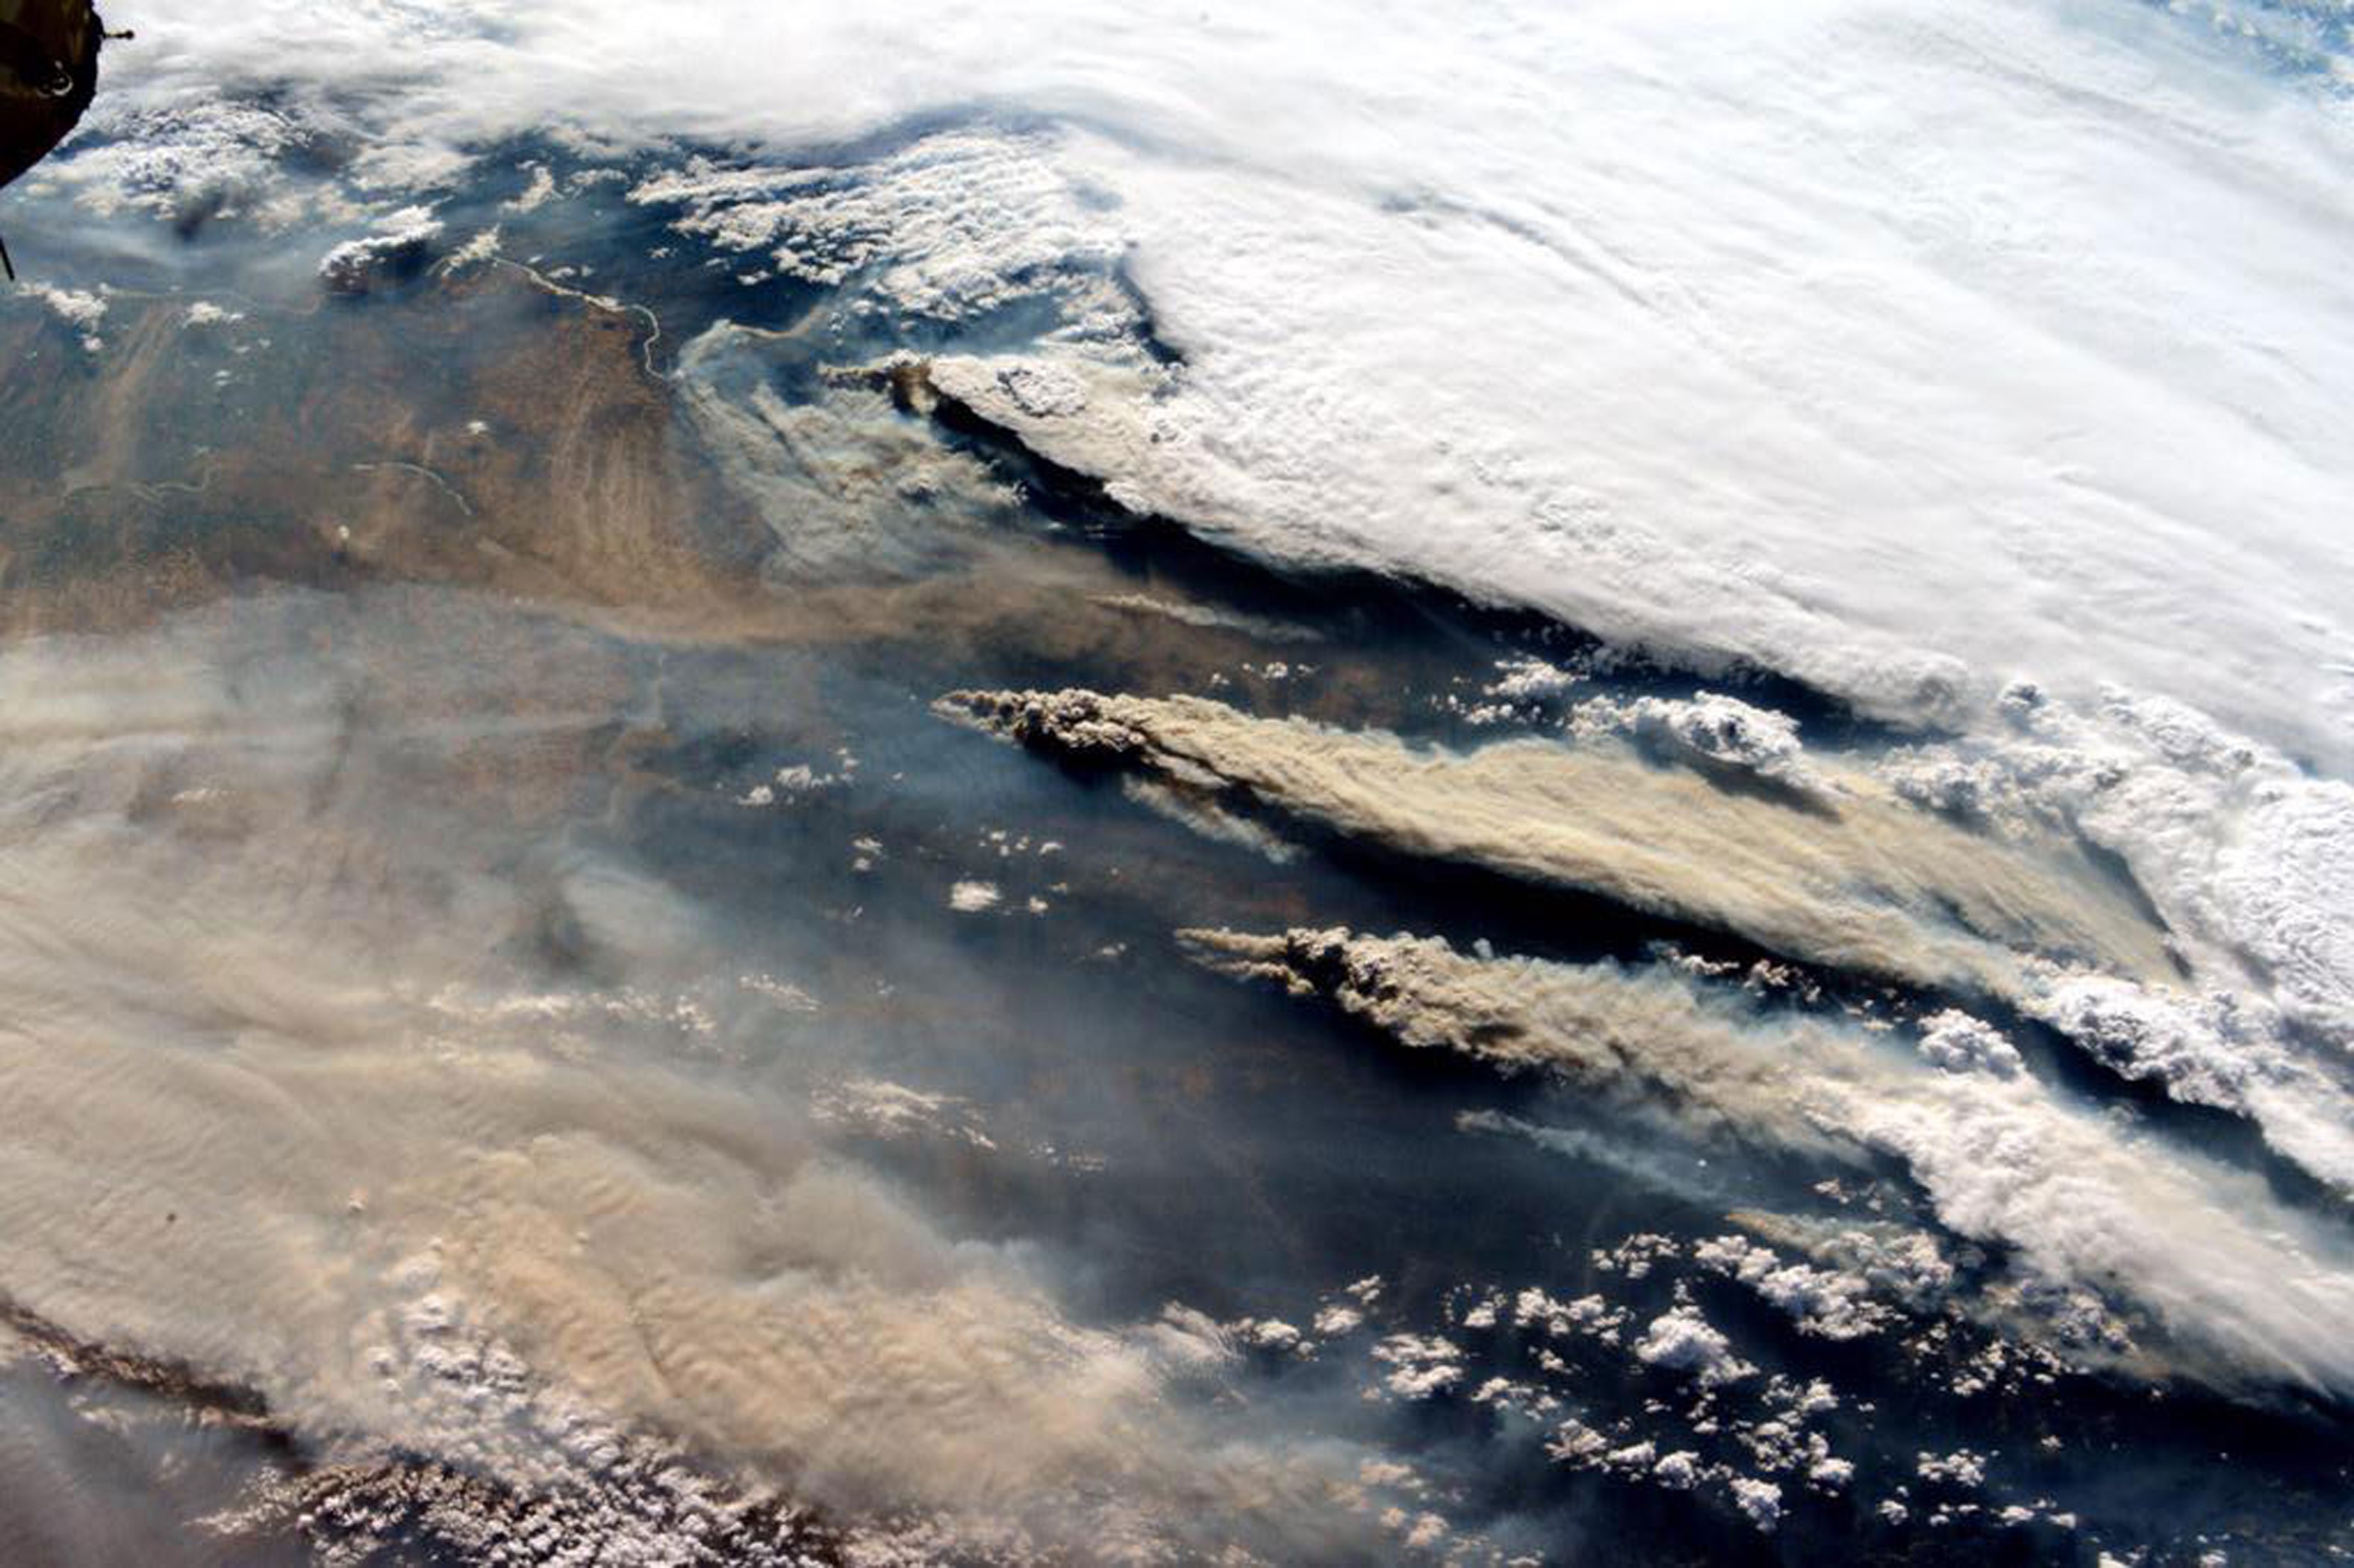 An image of the wildfires in the Northwest taken from the International Space Station released on Aug. 17, 2015.